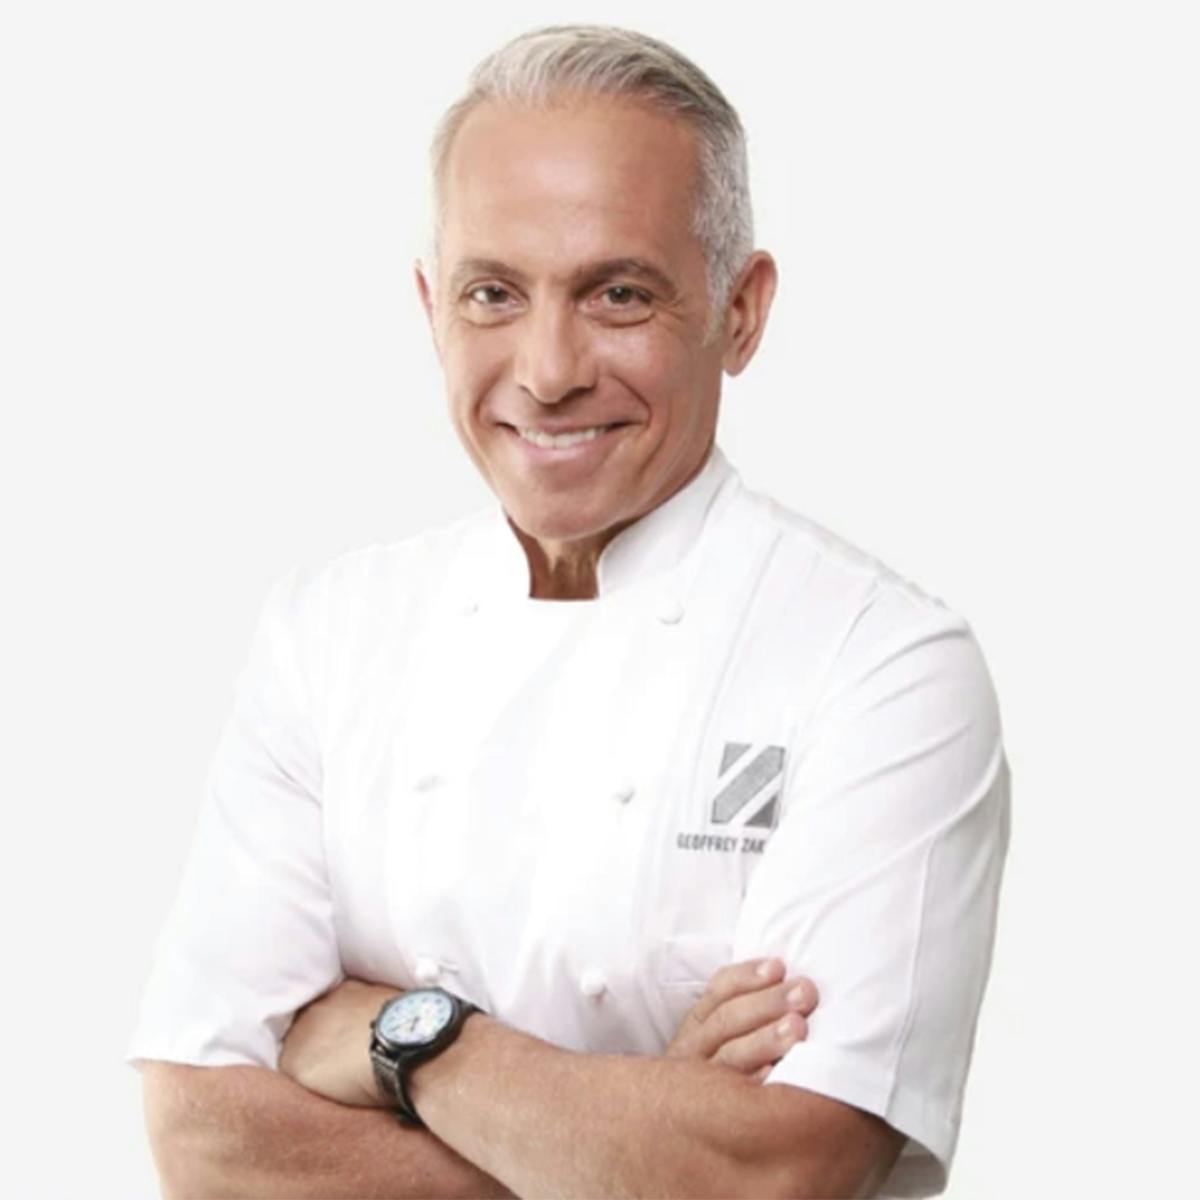 Then & Now: How Geoffrey Zakarian Changed Through The Years 